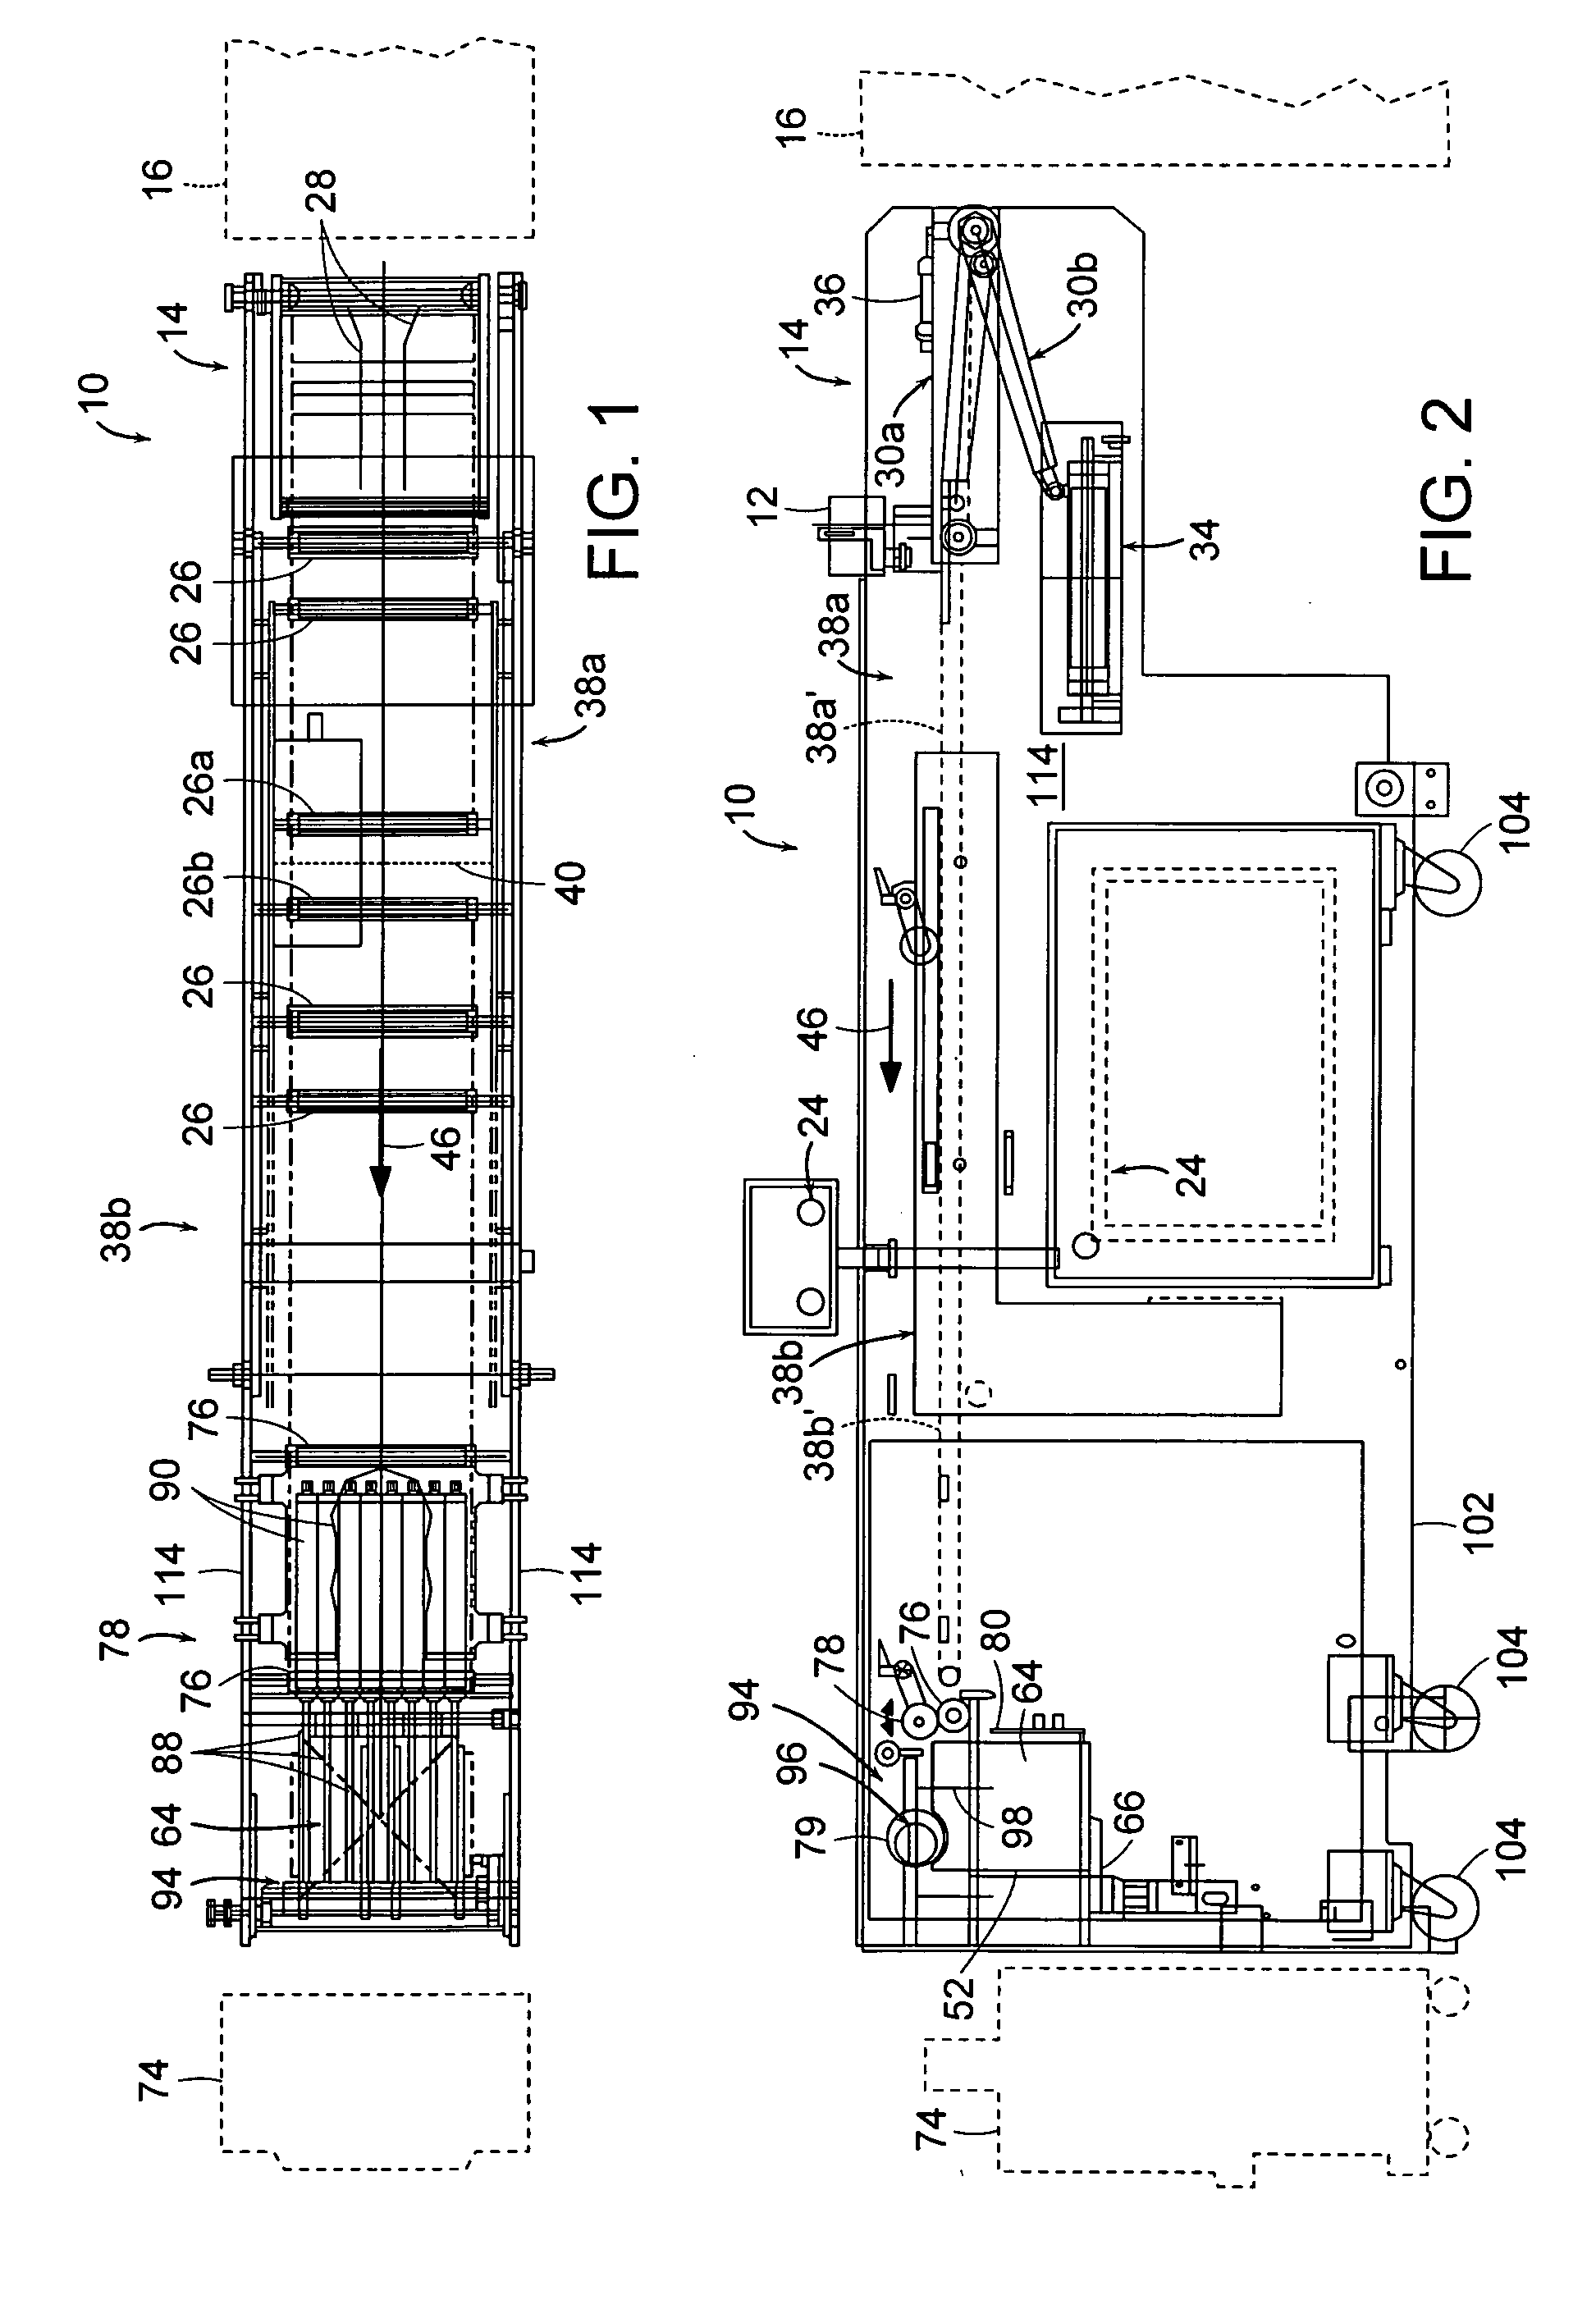 Inline stacker with non-interrupt gap generator and integrated drive control and jam response